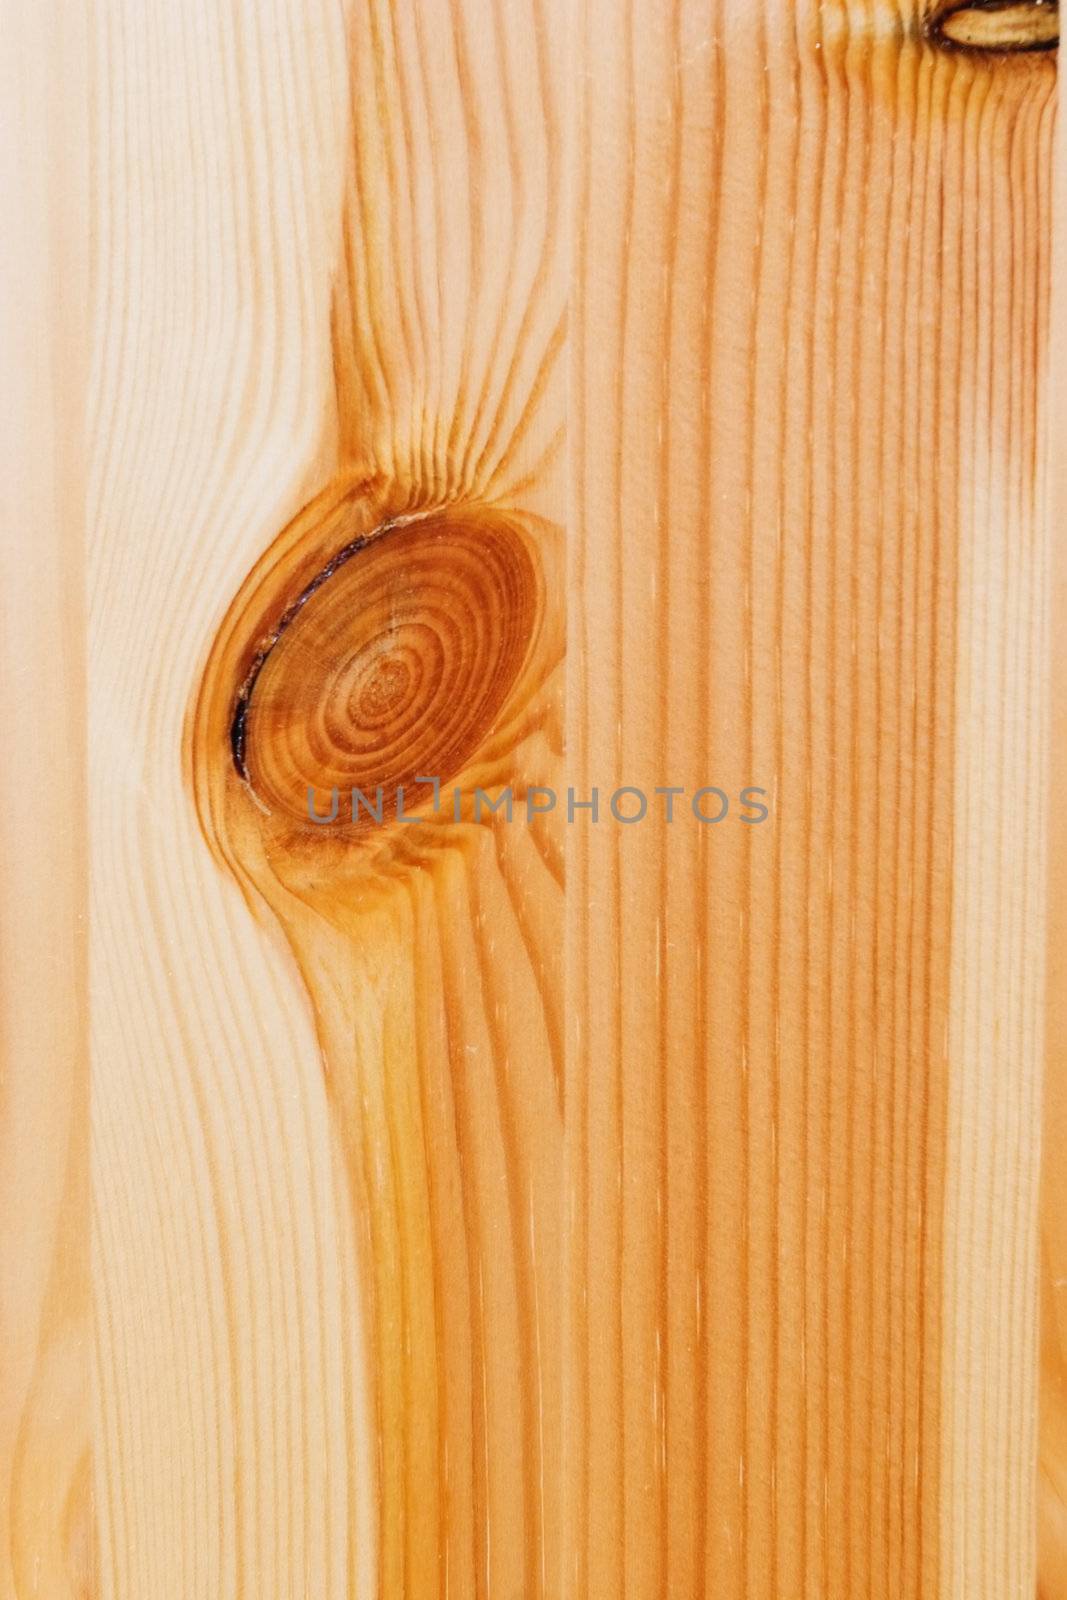 Structure of the varnished wooden board